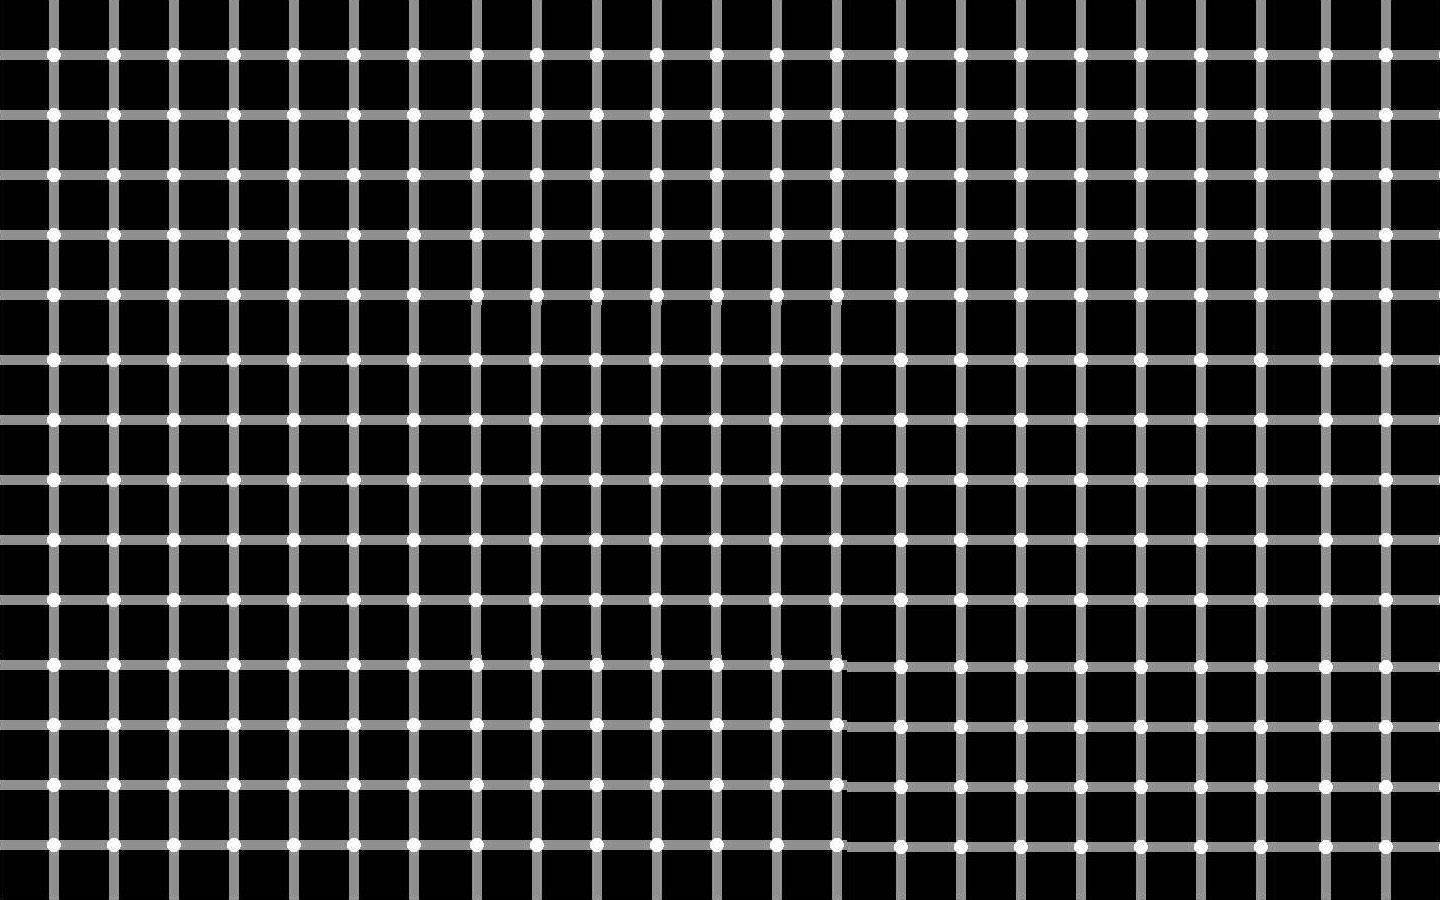 IPhone 6 Optical illusion Wallpapers HD, Desktop Backgrounds 750x1334